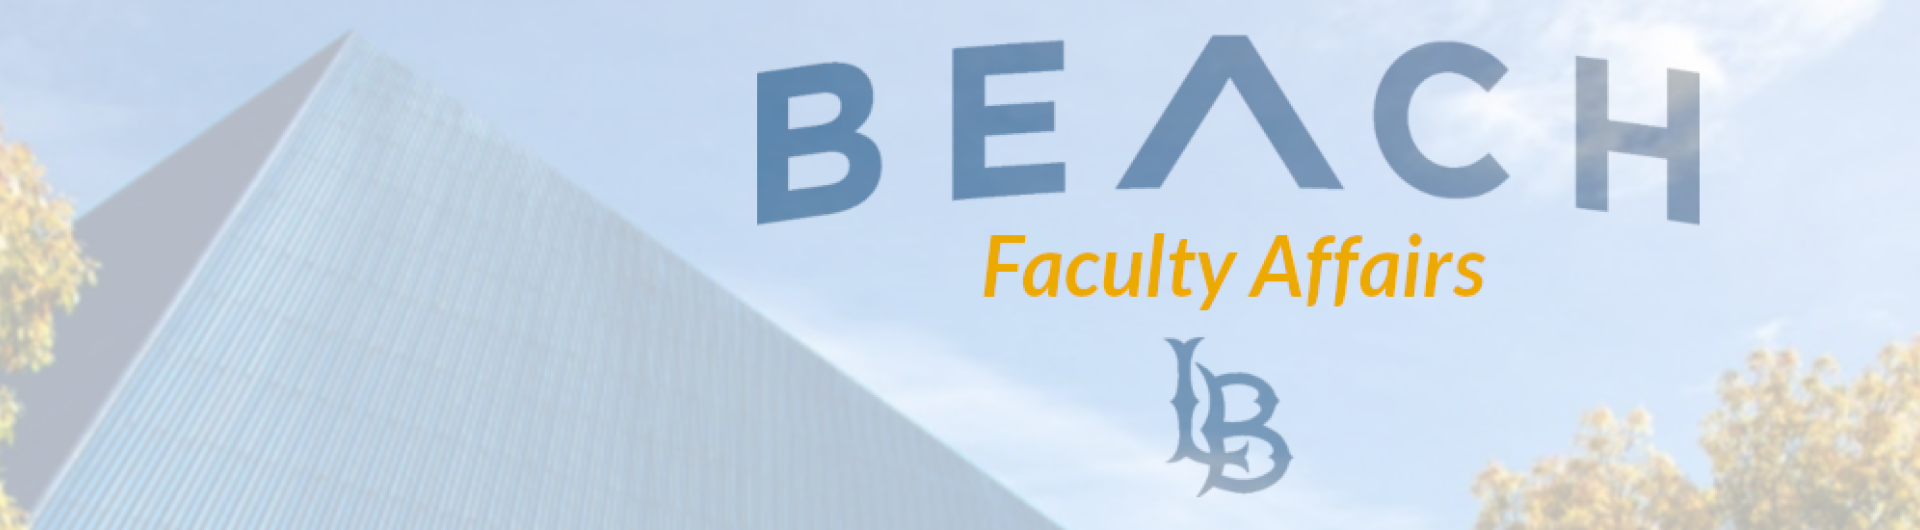 Faculty Affairs Banner